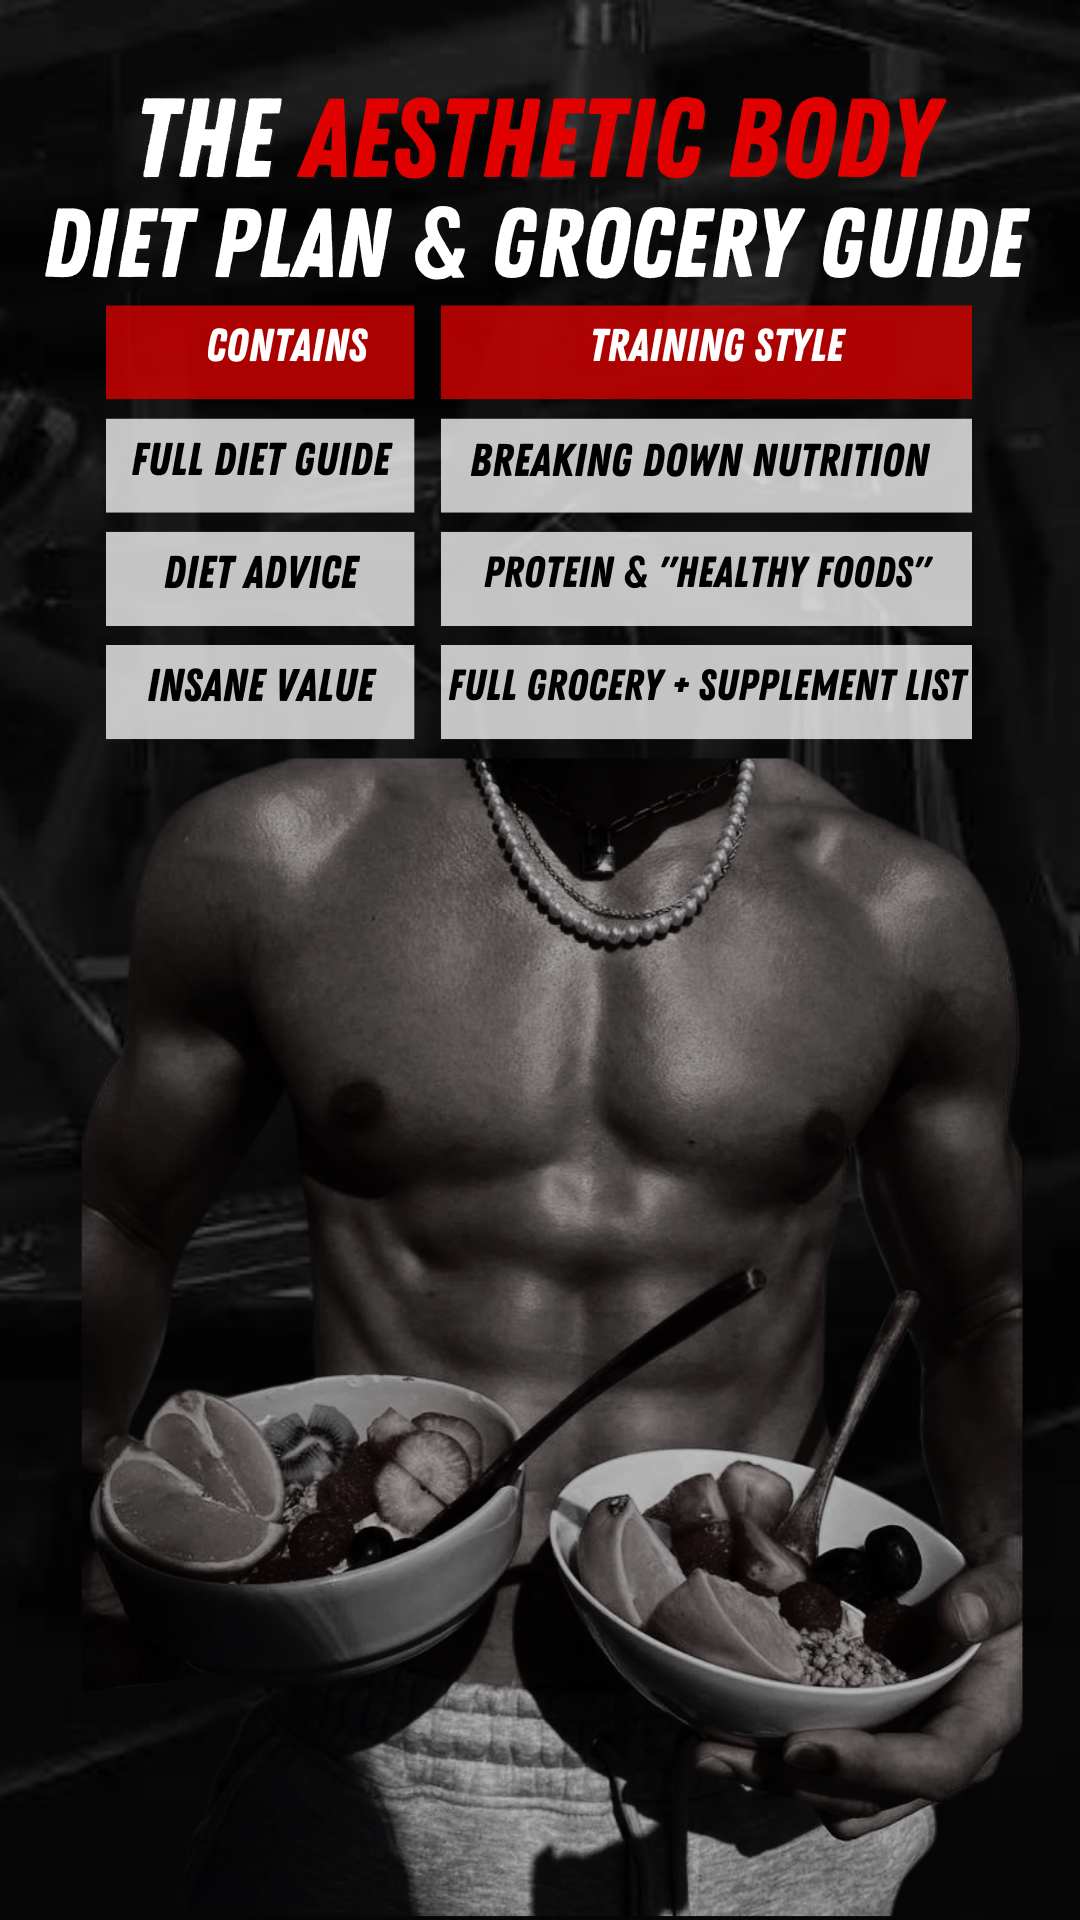 The Aesthetic Body Diet Plan & Grocery Guide